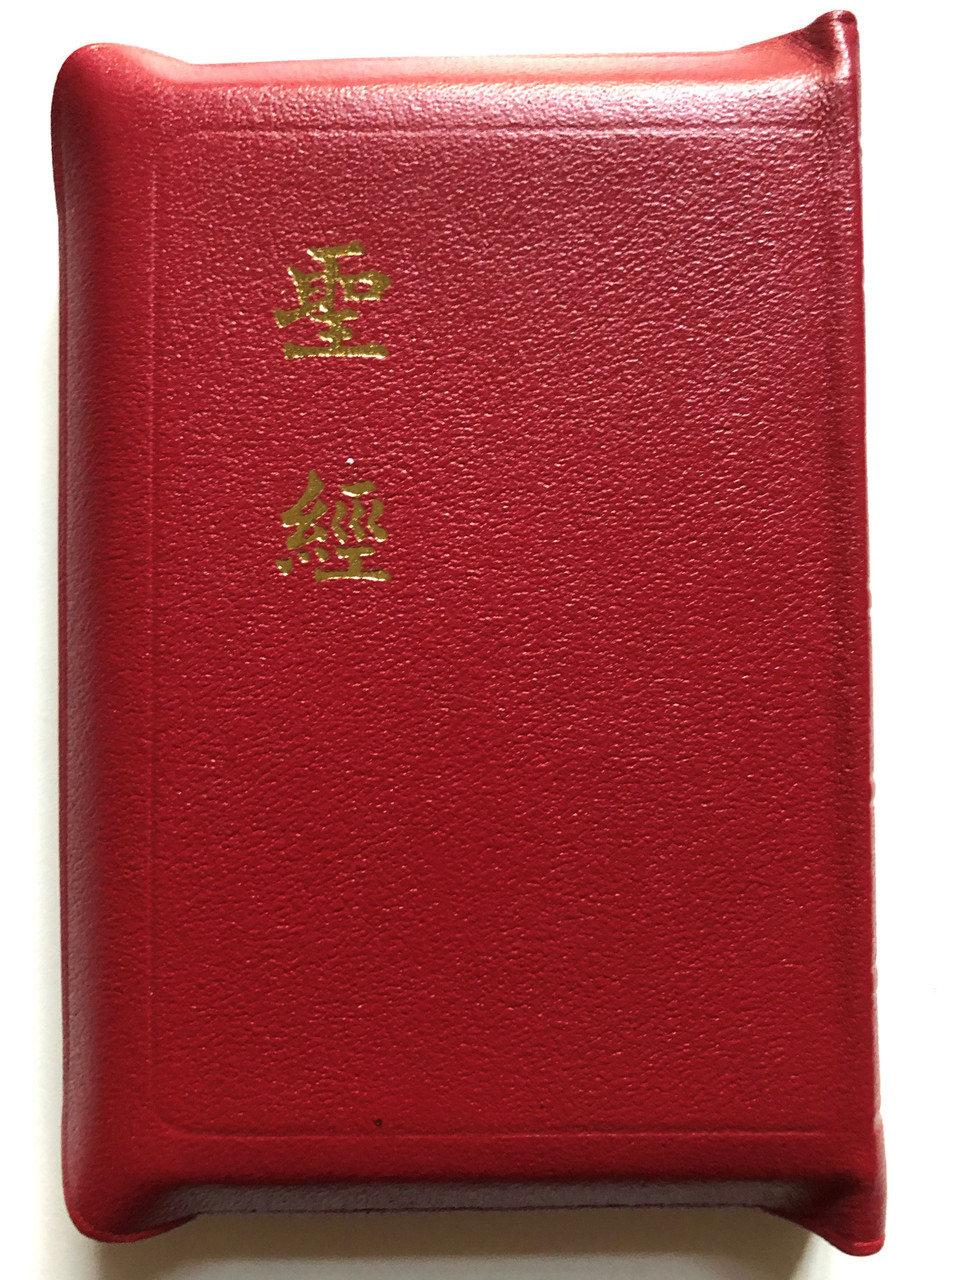 https://cdn10.bigcommerce.com/s-62bdpkt7pb/products/50654/images/258318/Red_leather_cover_Chinese_Holy_Bible_1__84187.1668175079.1280.1280.JPG?c=2